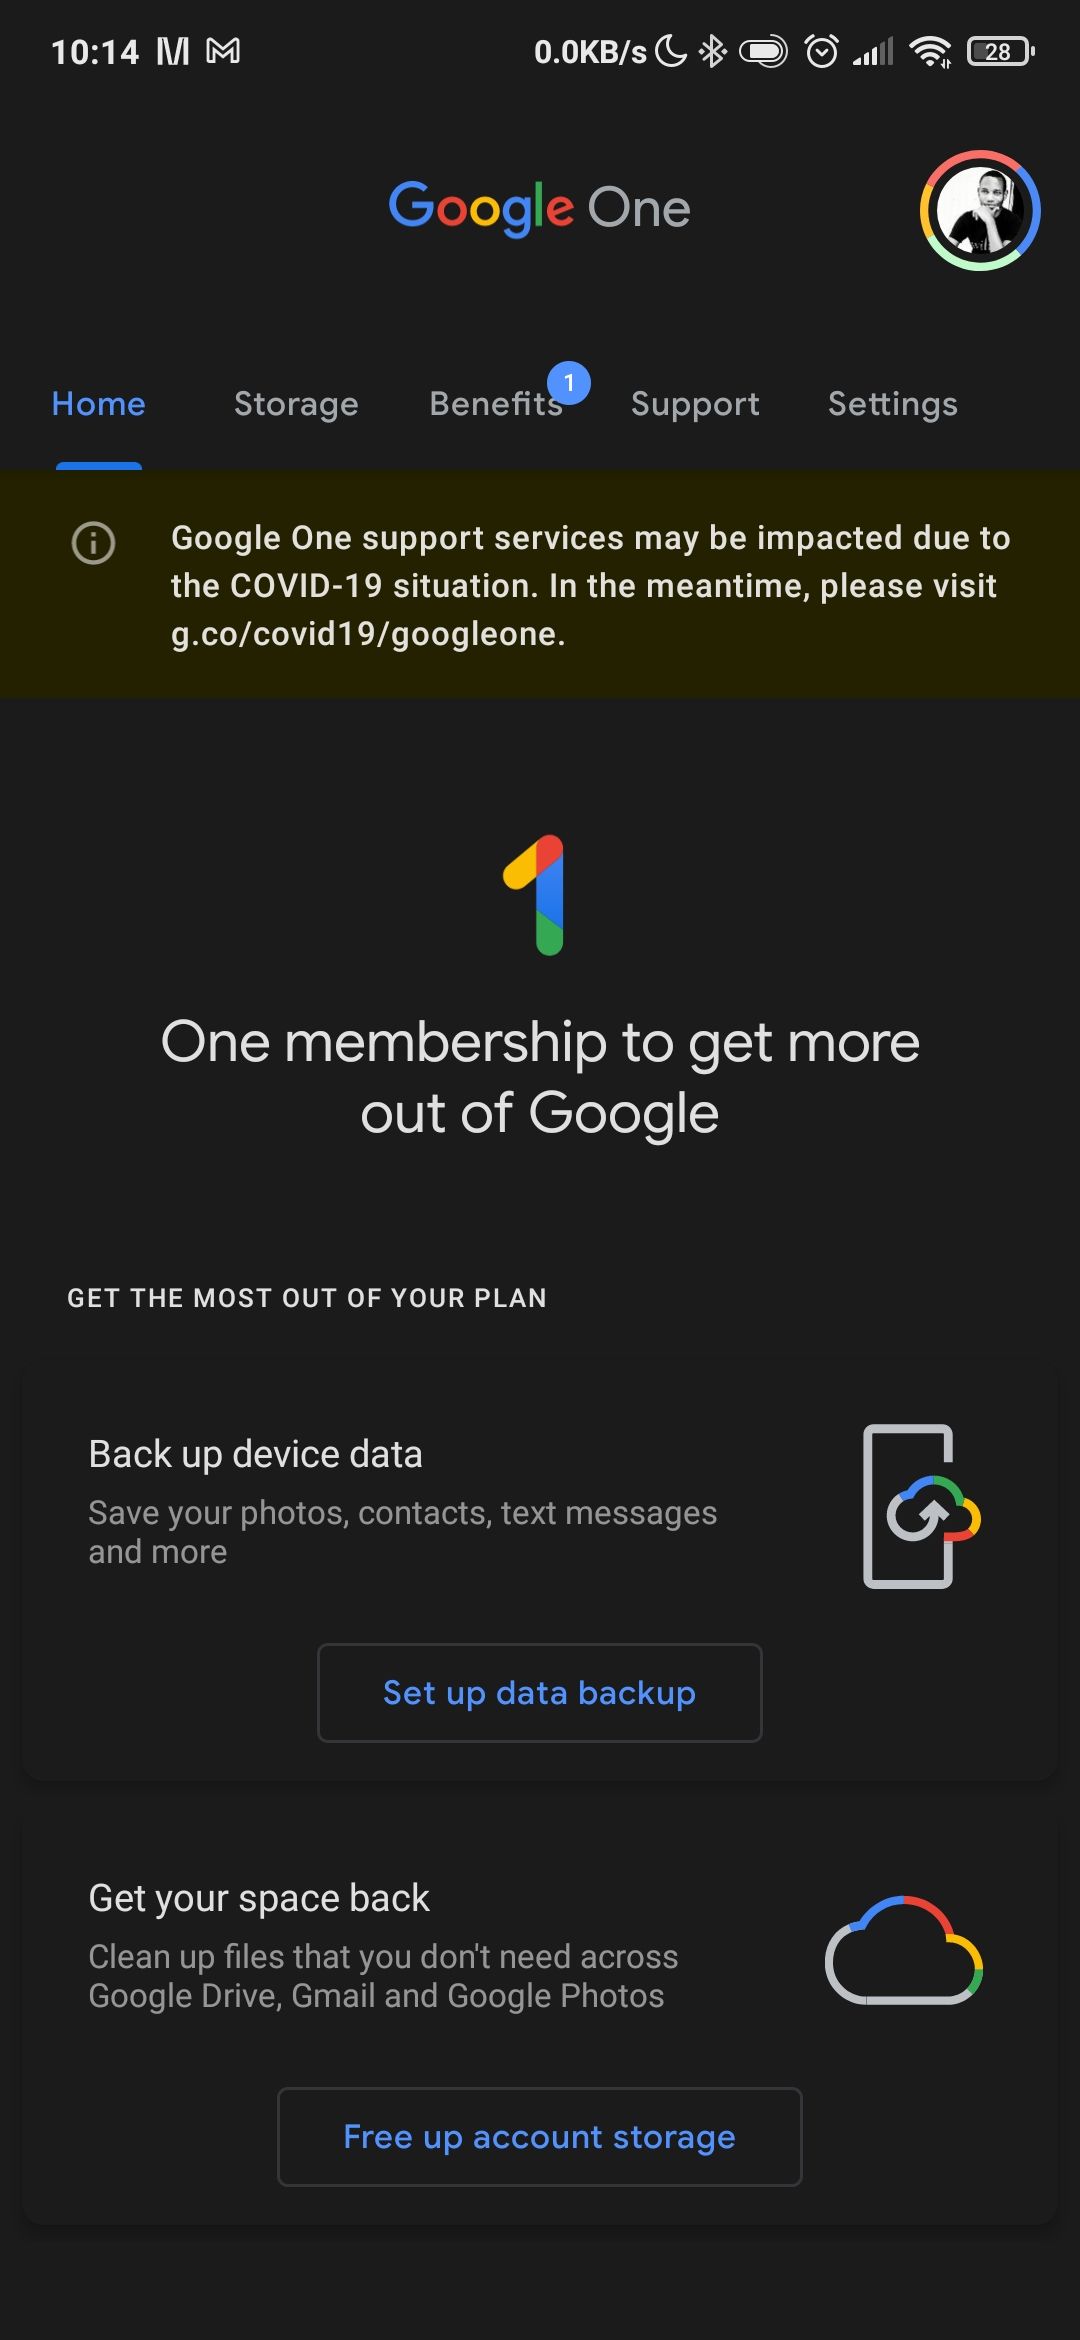 Inside Google One app on Android